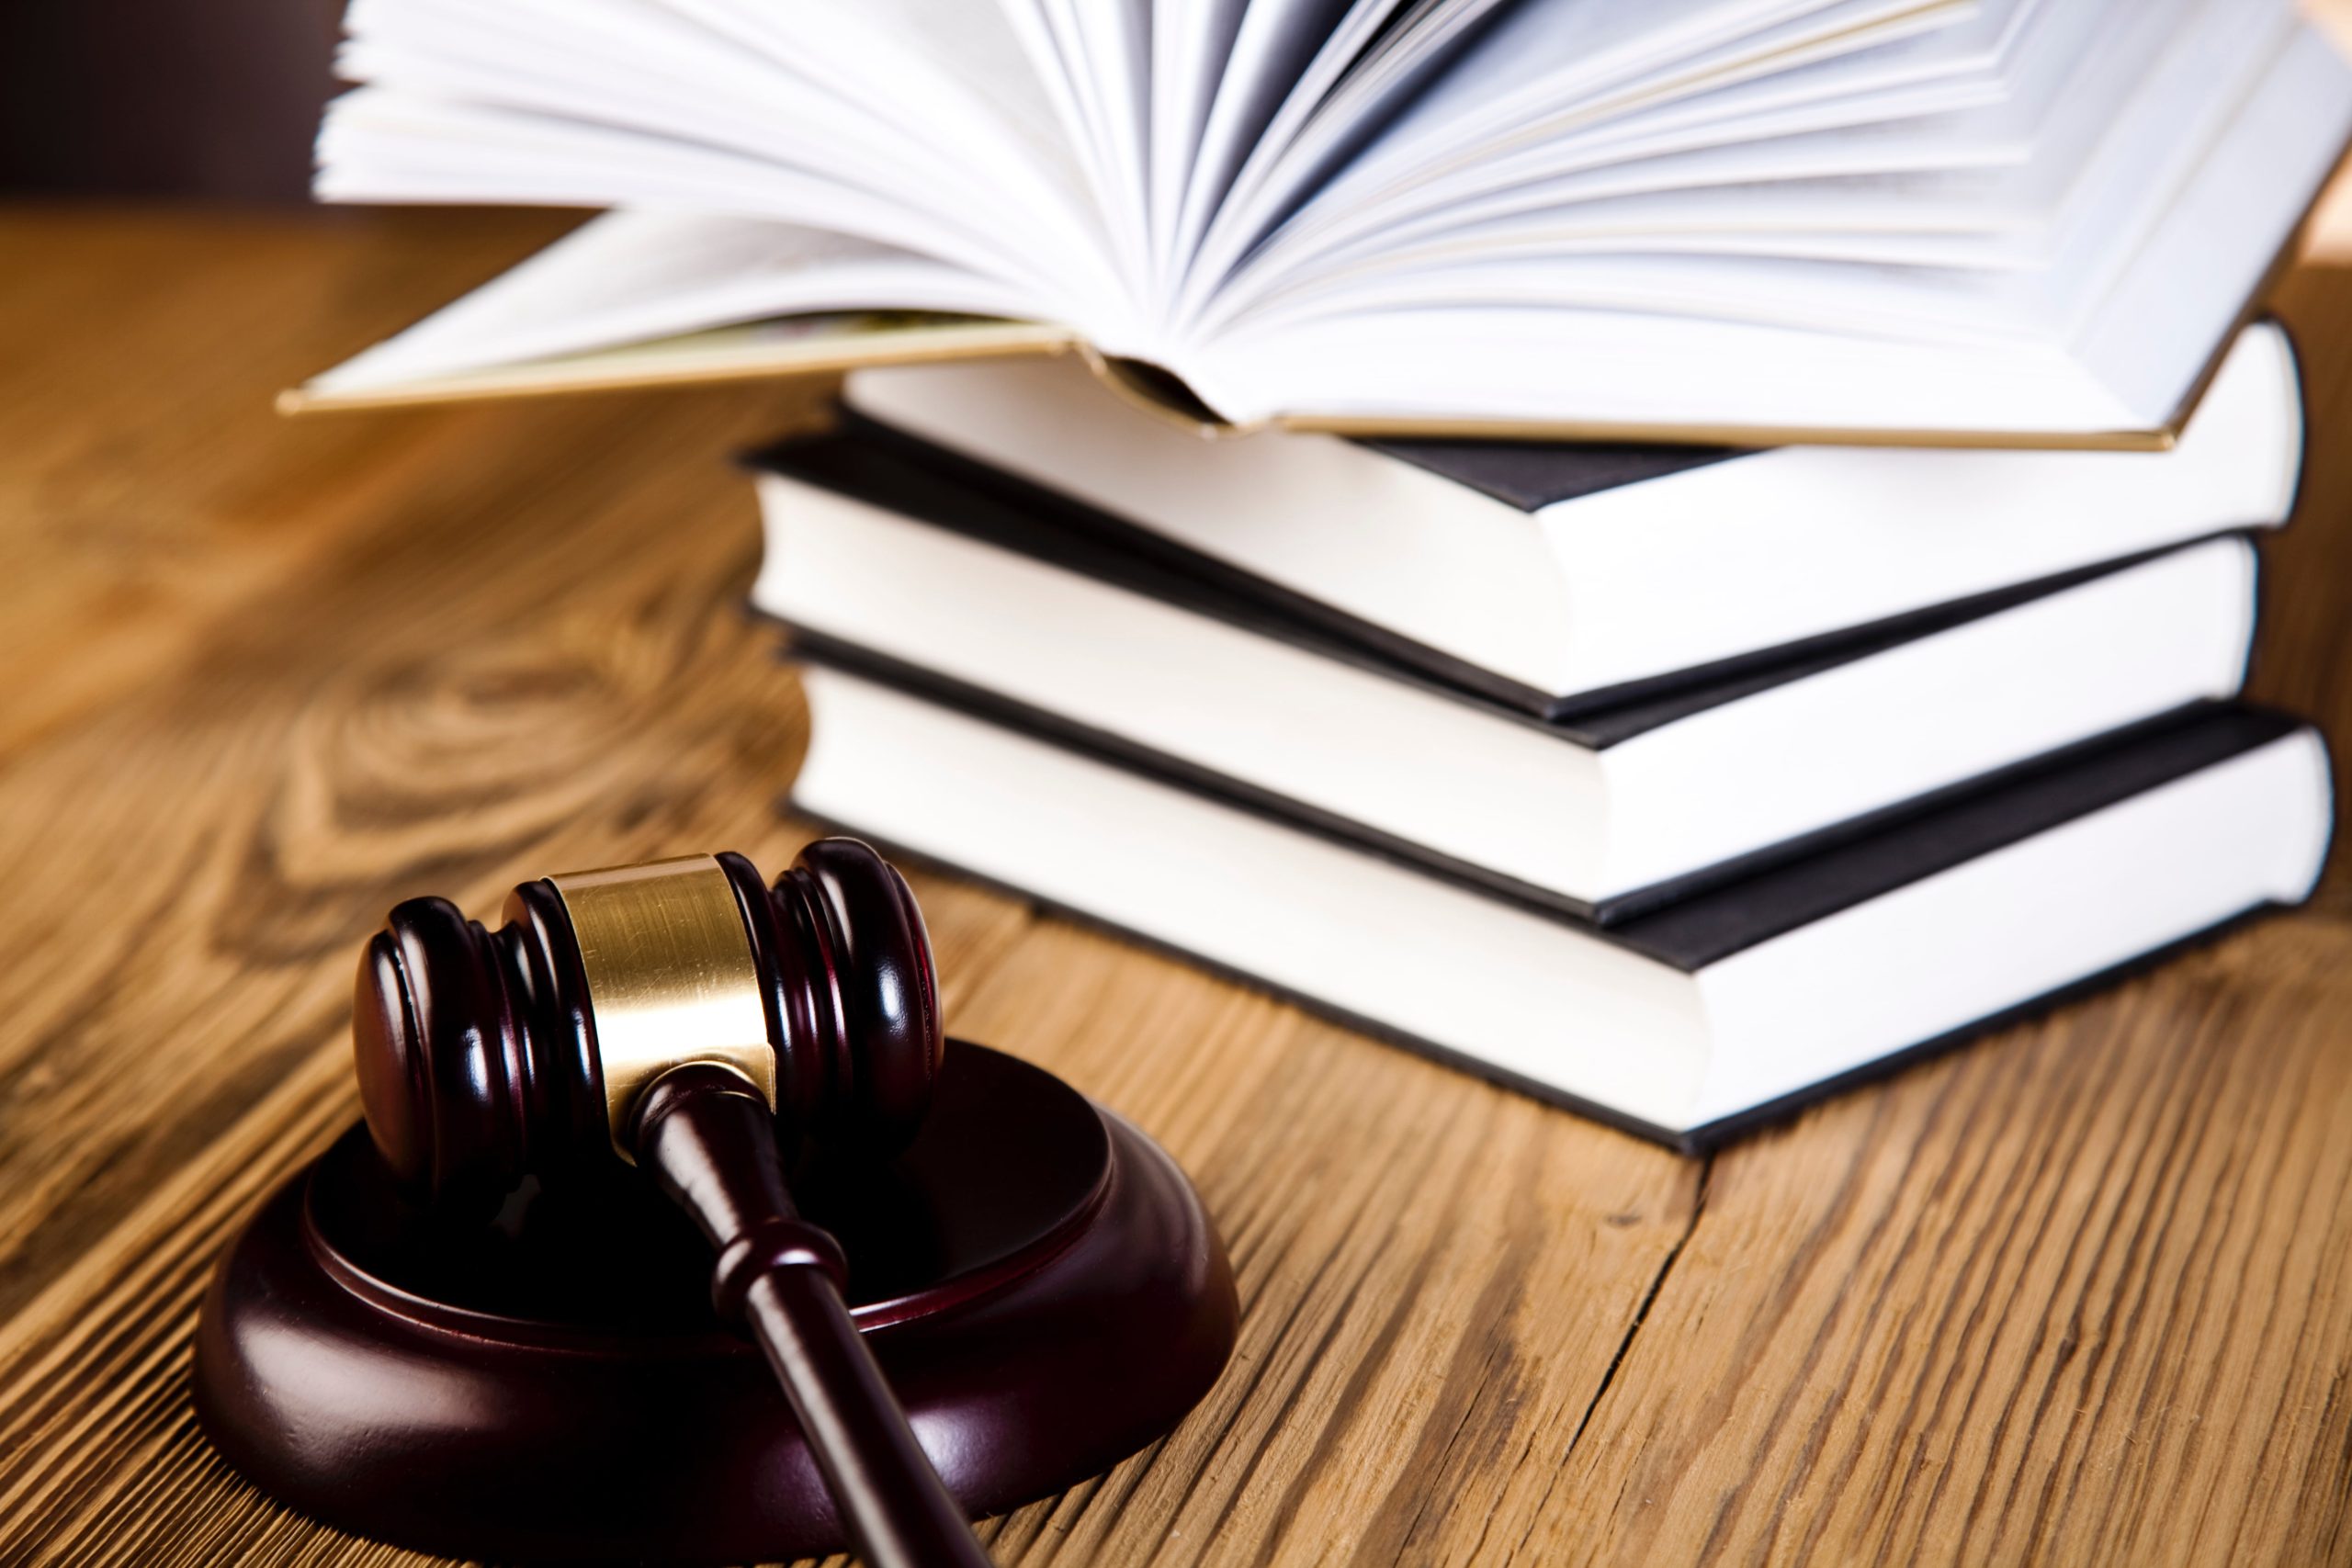 Image of a stack of legal books that a civil litigation attorney would use.